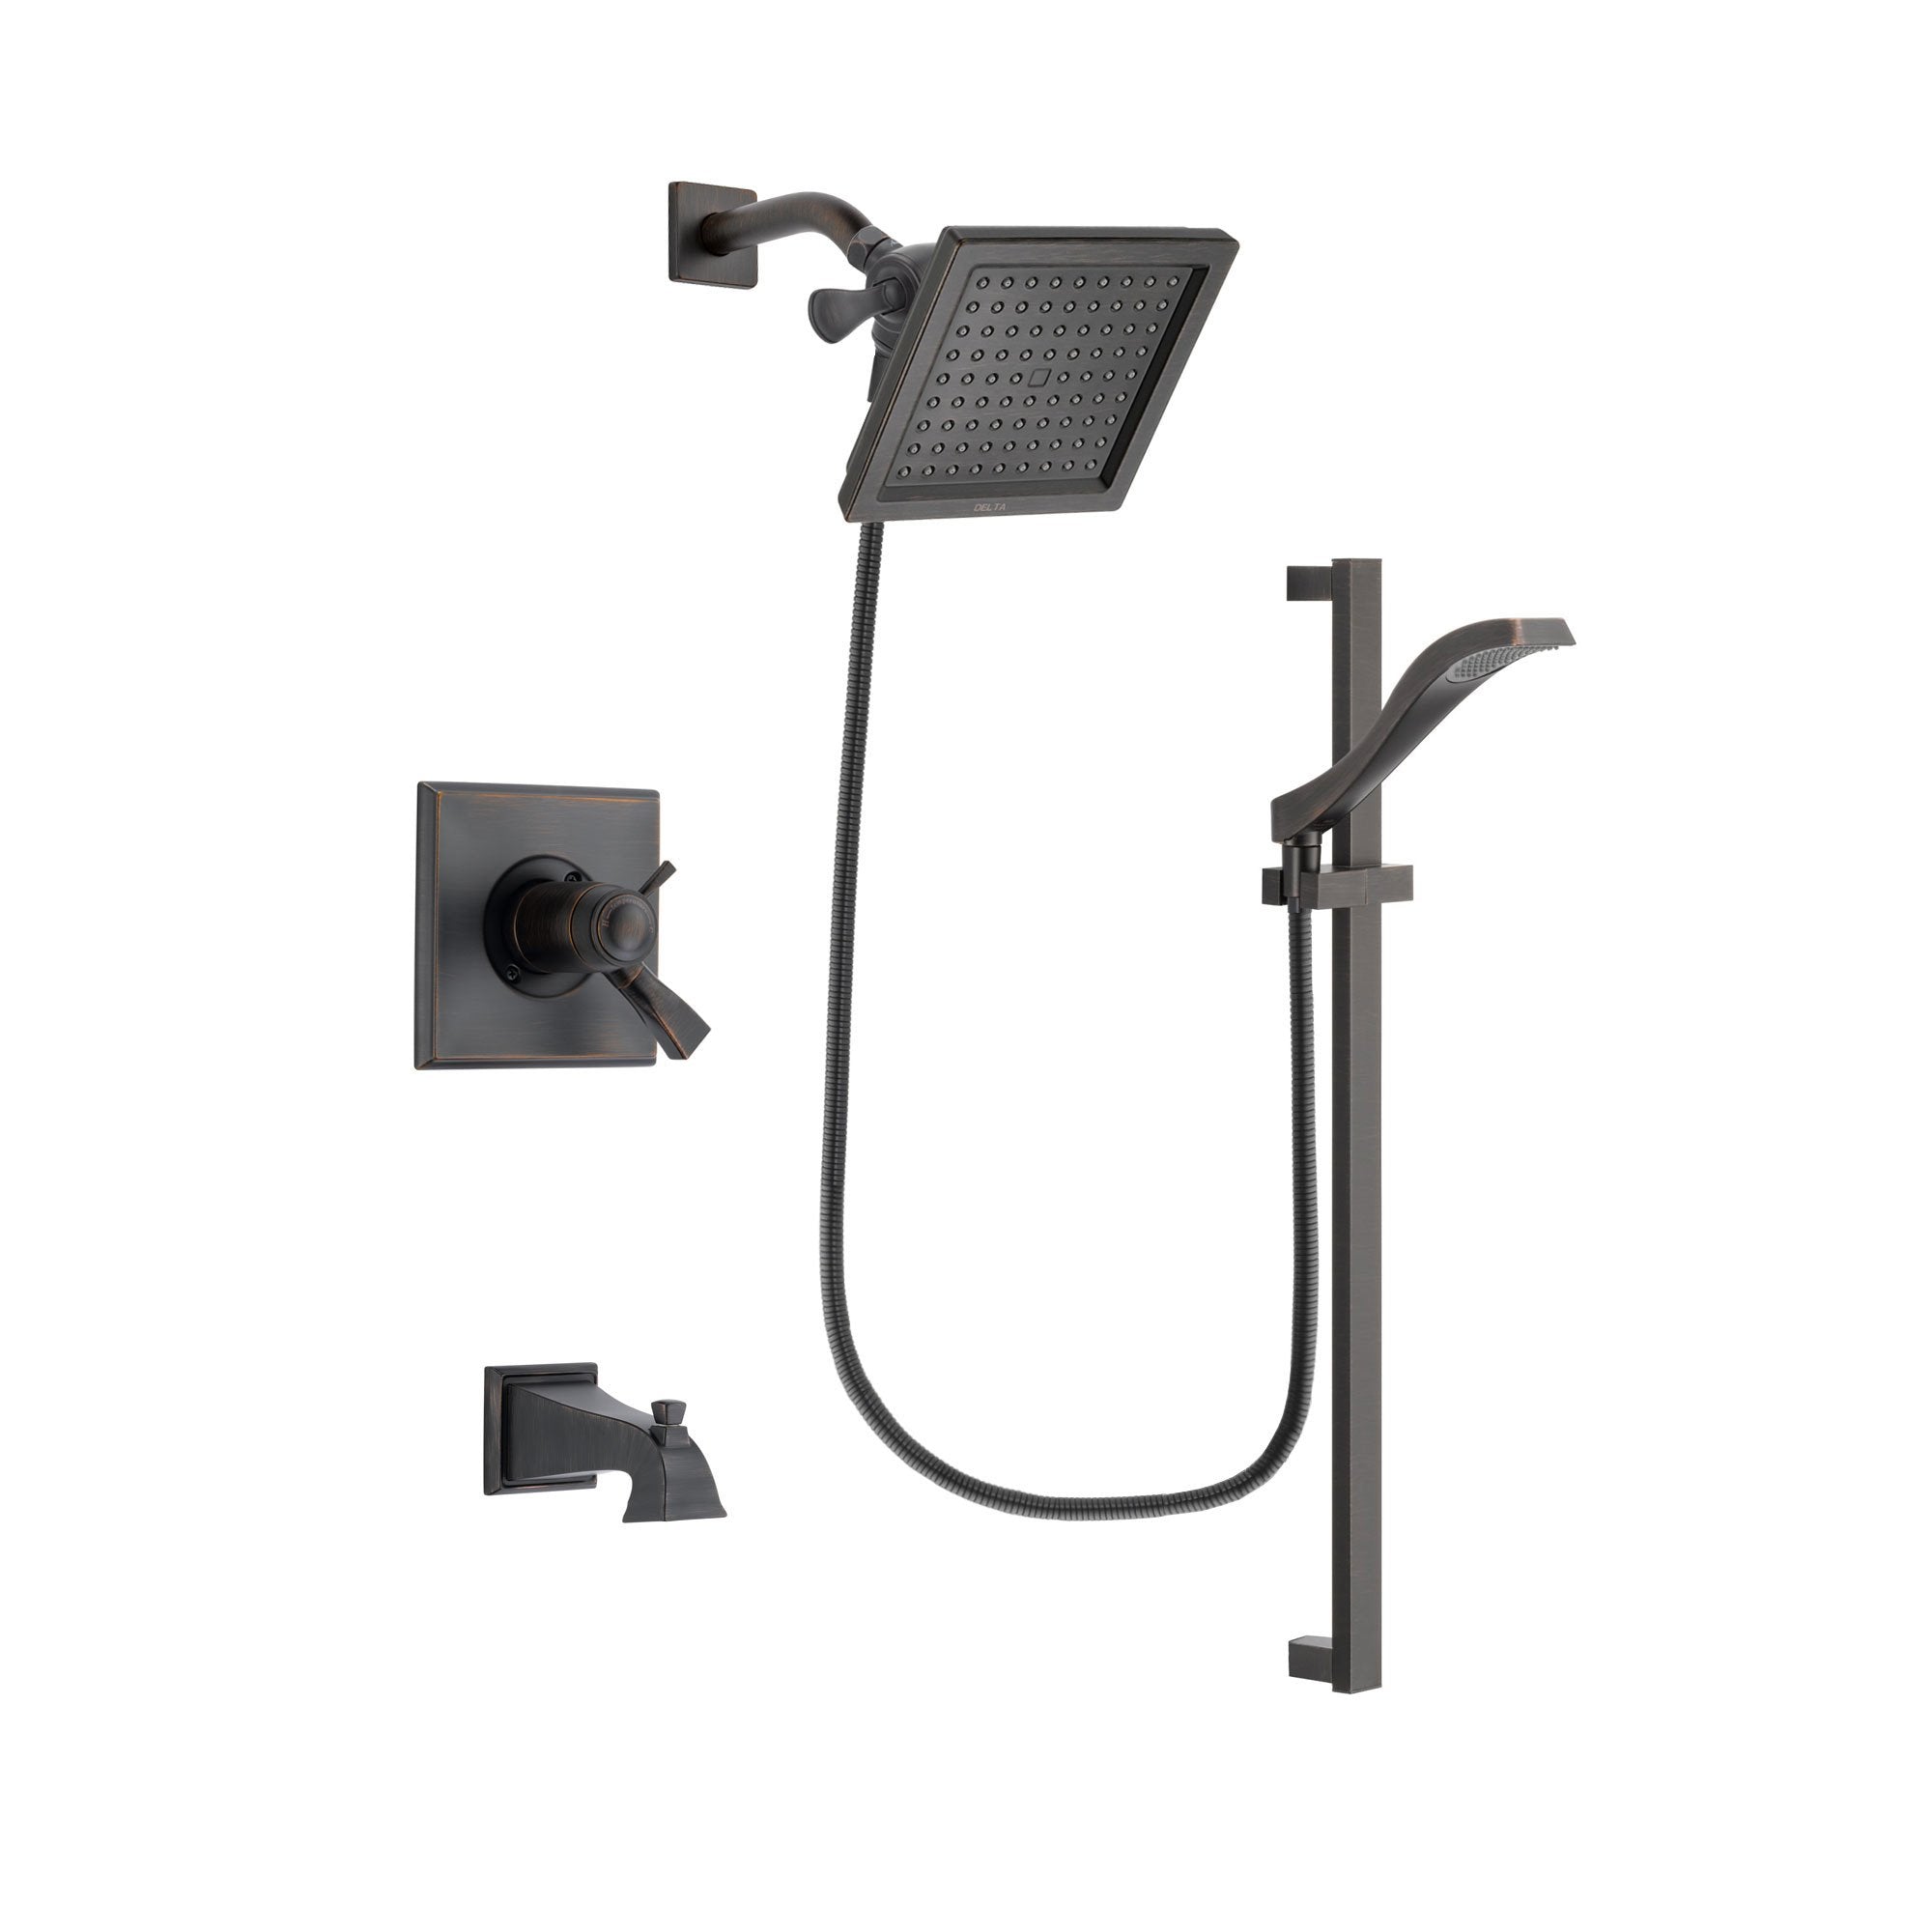 Delta Dryden Venetian Bronze Finish Thermostatic Tub and Shower Faucet System Package with 6.5-inch Square Rain Showerhead and Modern Handheld Shower Spray with Slide Bar Includes Rough-in Valve and Tub Spout DSP3113V